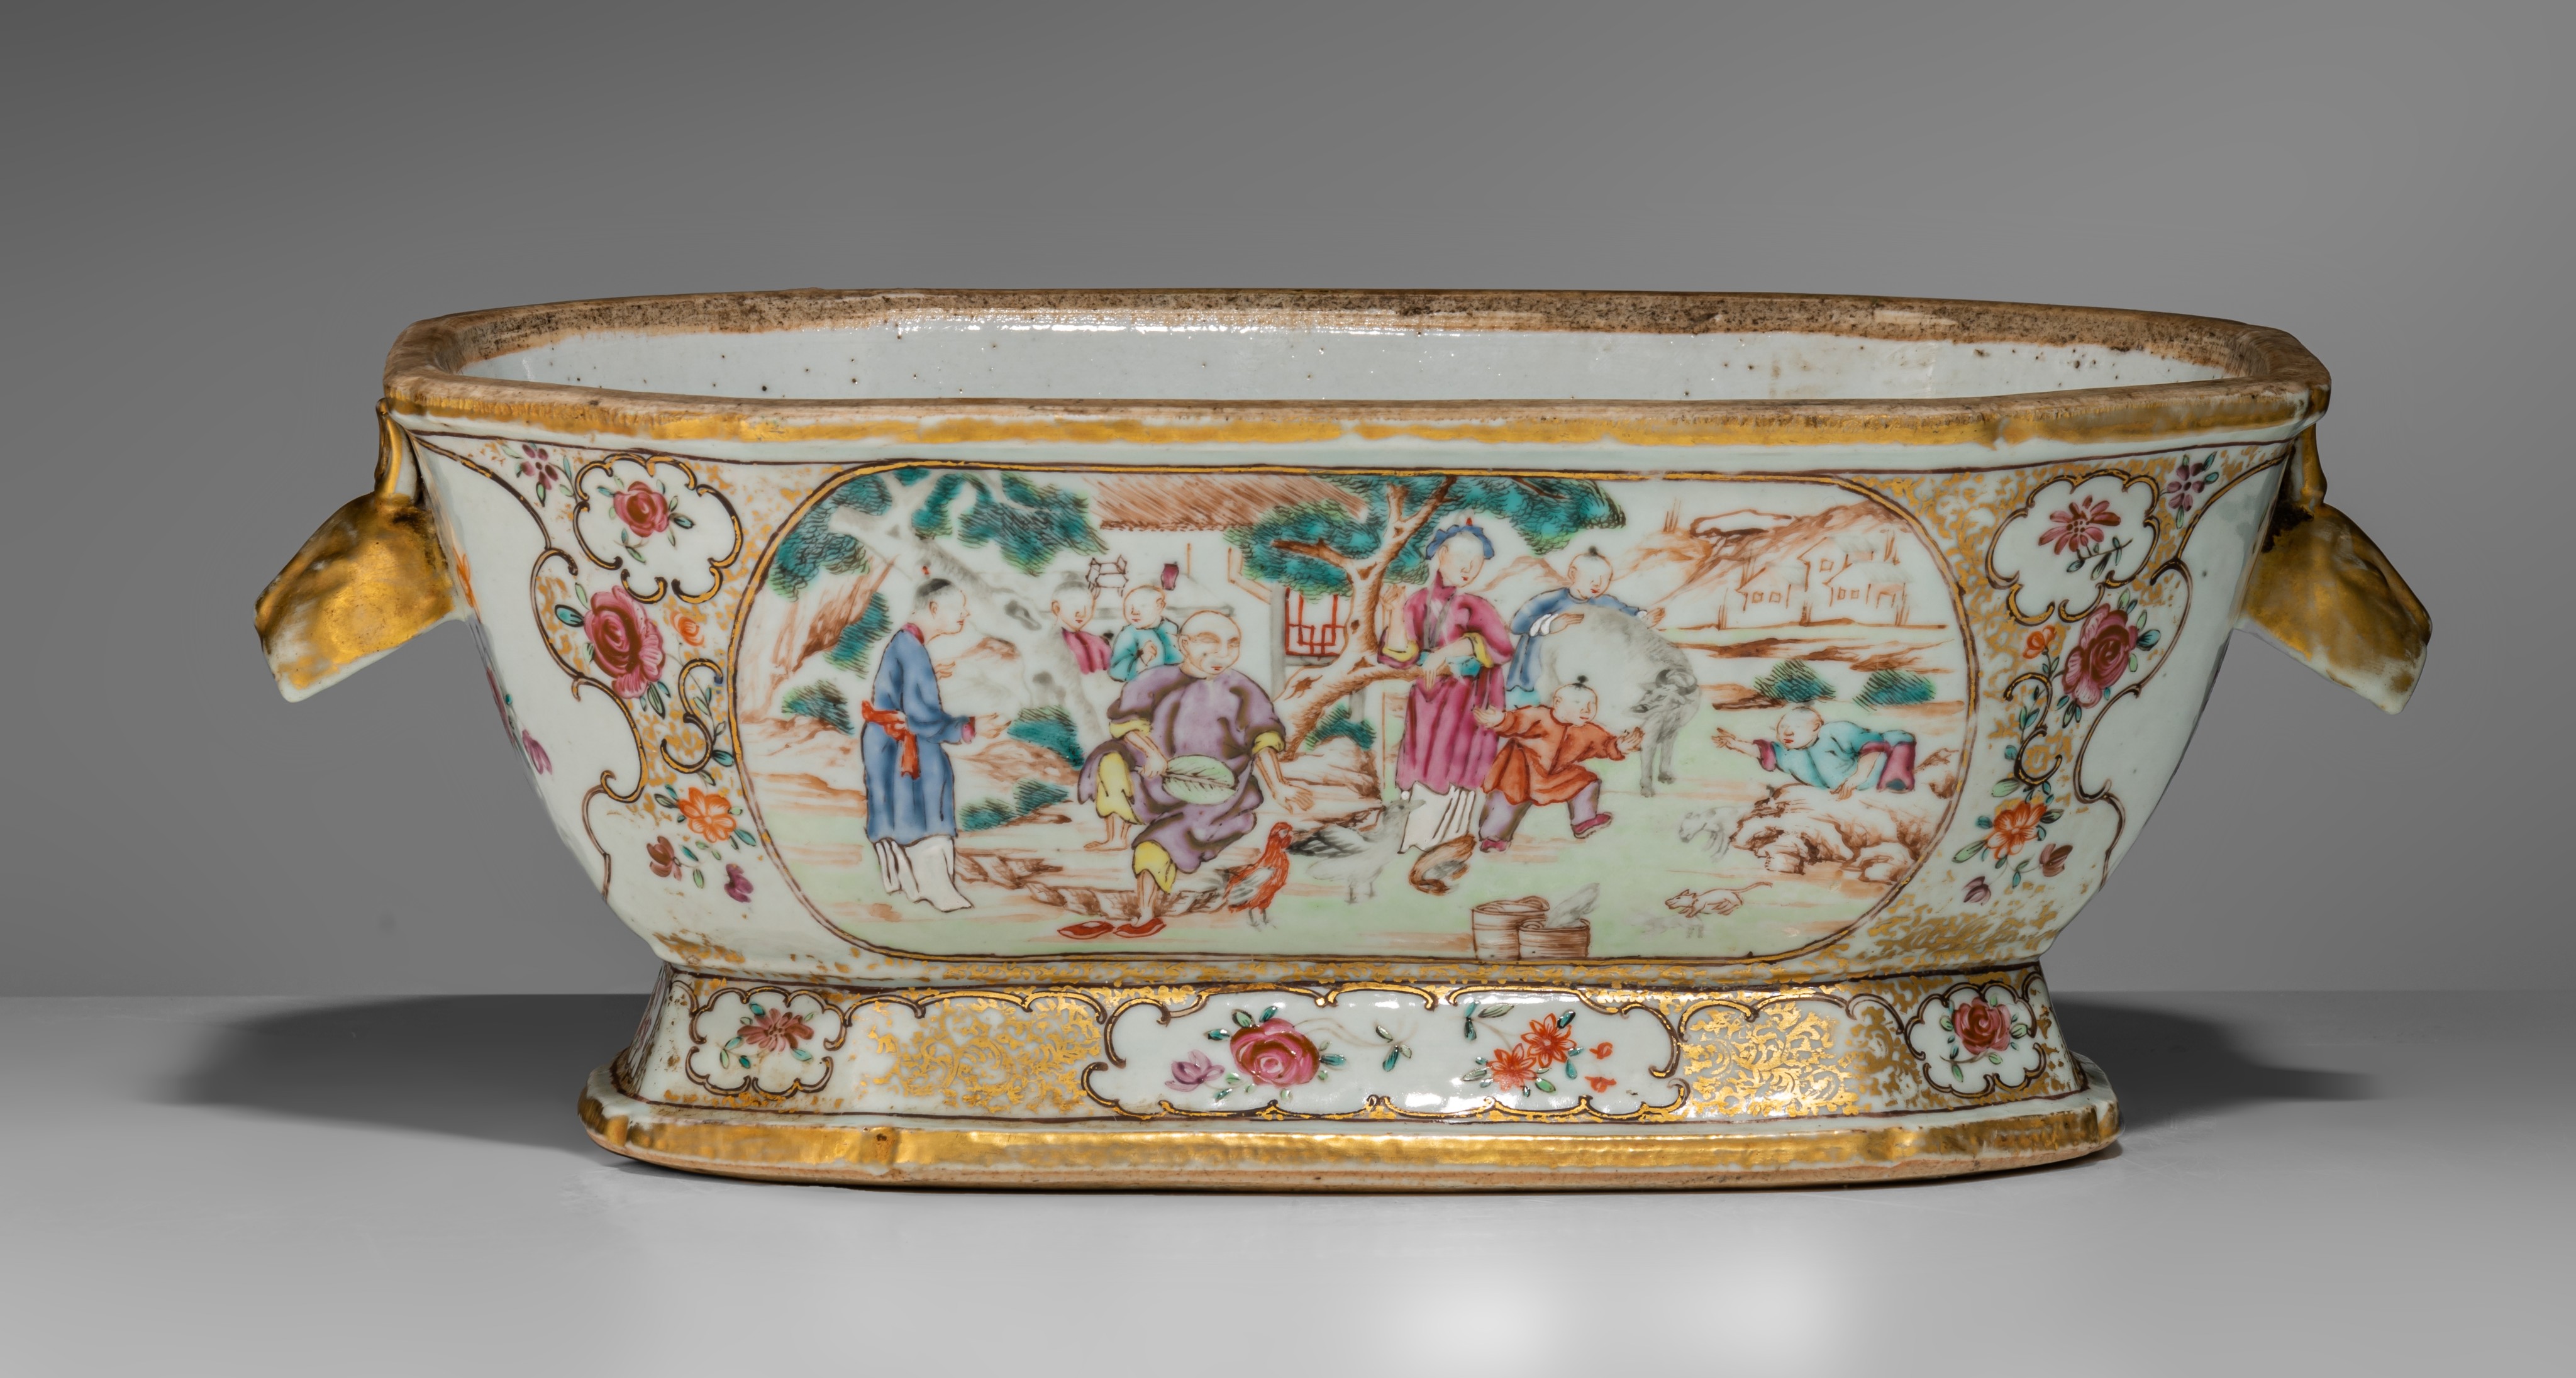 A collection of famille rose and gilt decorated export porcelain ware, 18thC, largest - H 12,5 - 34, - Image 10 of 20